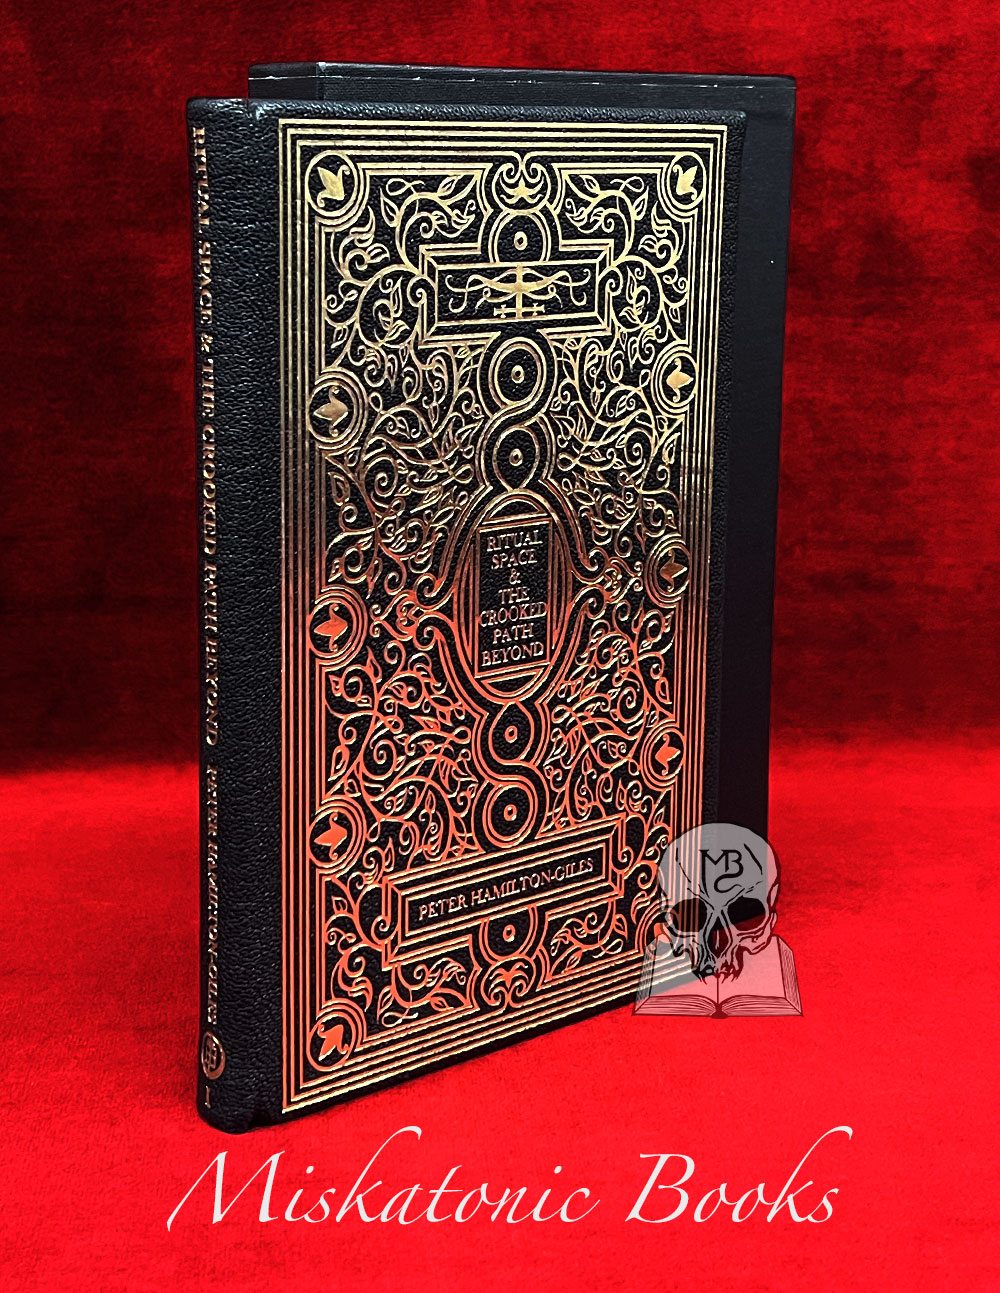 RITUAL SPACE AND THE CROOKED PATH BEYOND Vol I by Peter Hamilton-Giles - Signed Deluxe Leather Bound Edition in Custom Slipcase